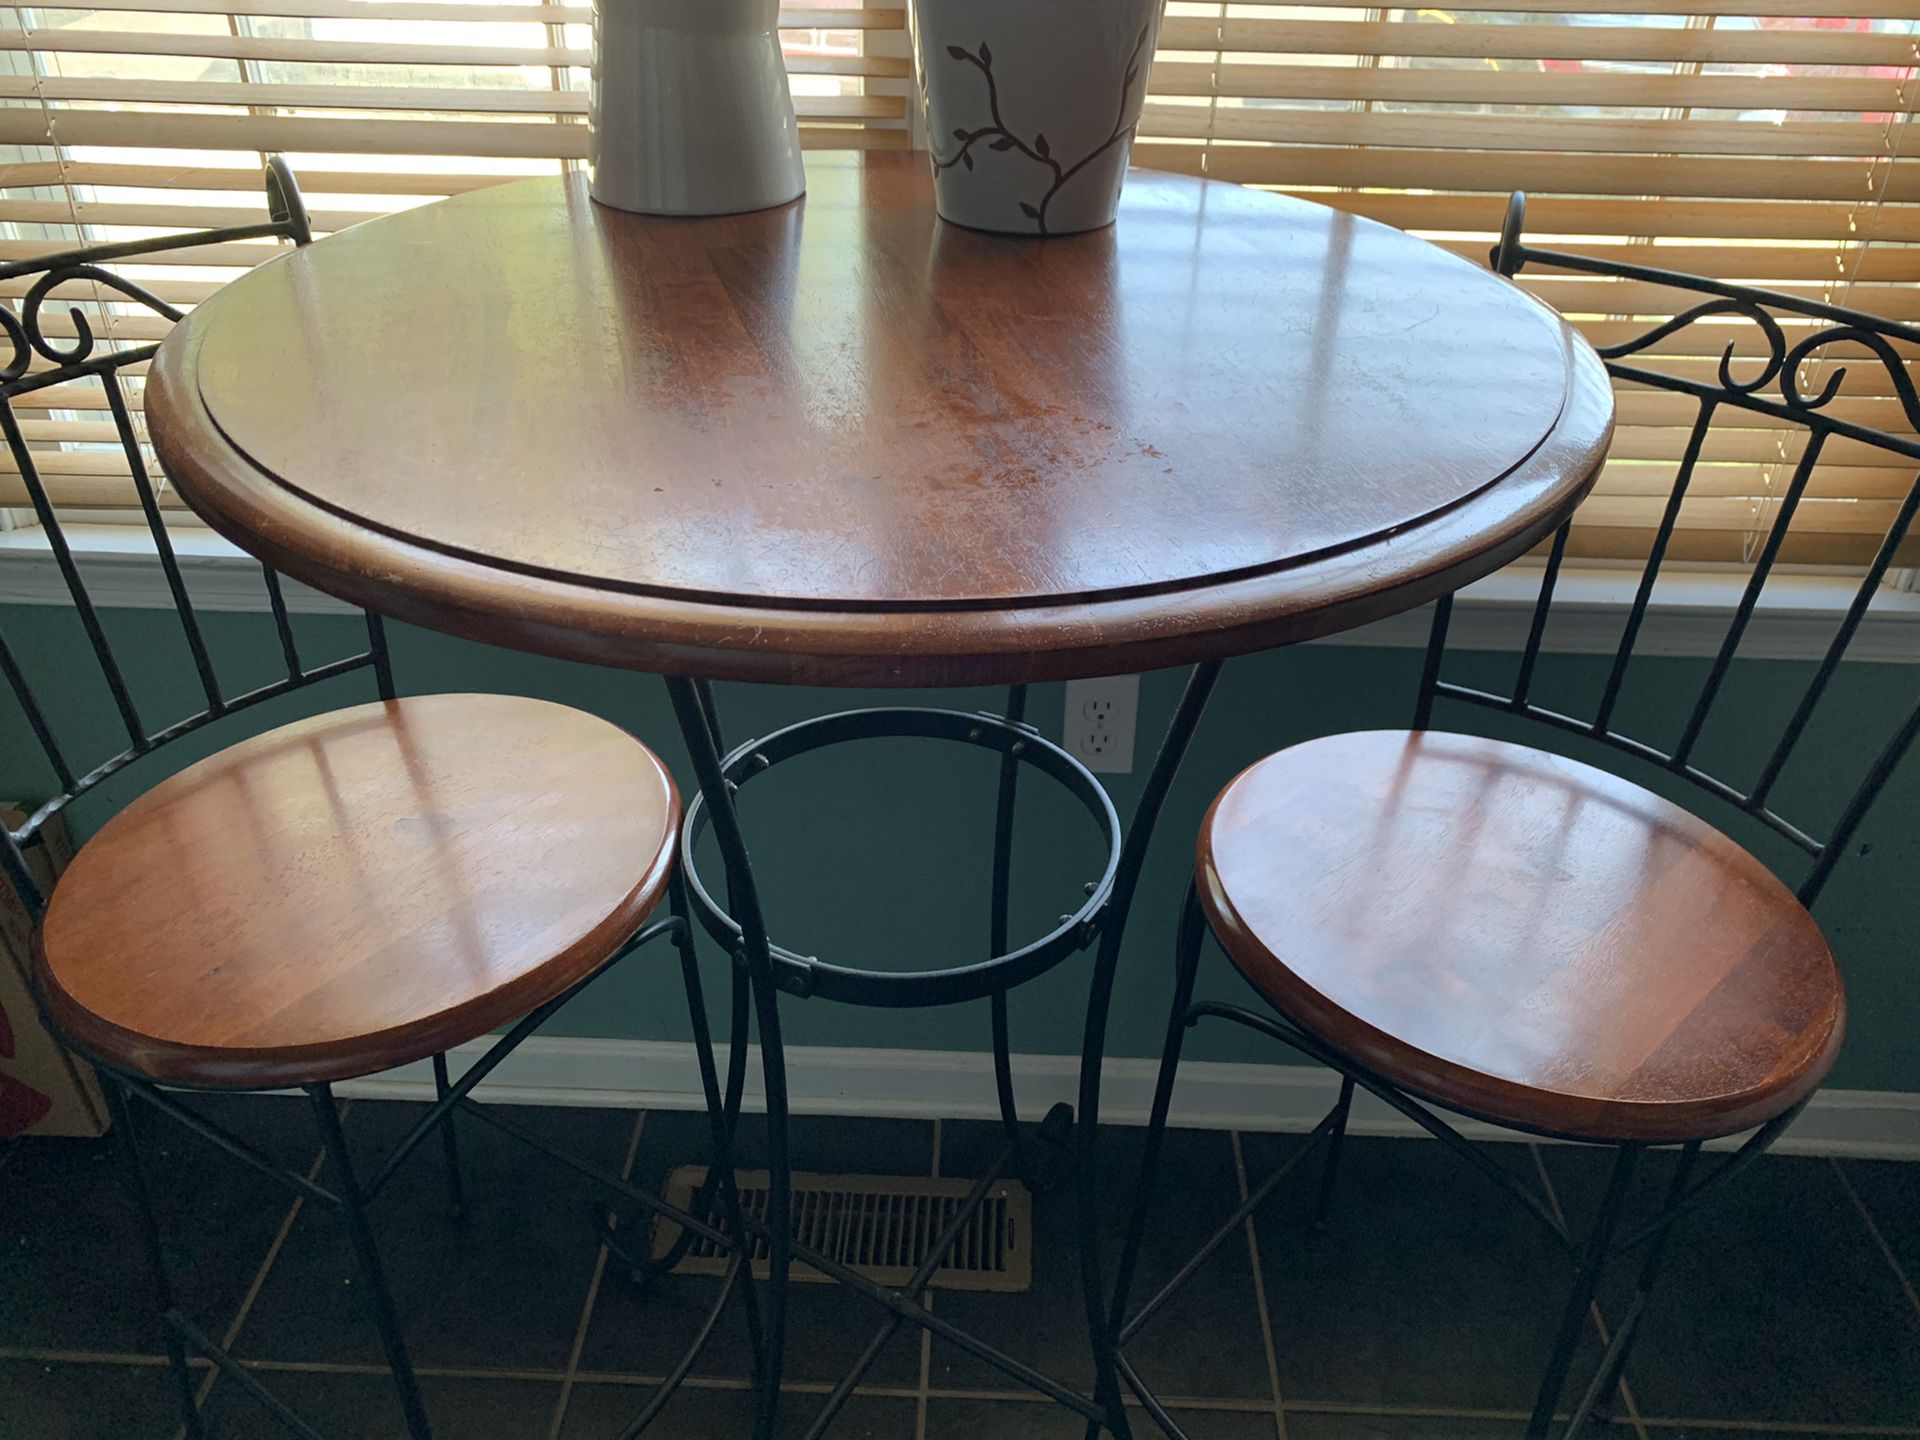 Pub table with two bar chairs.